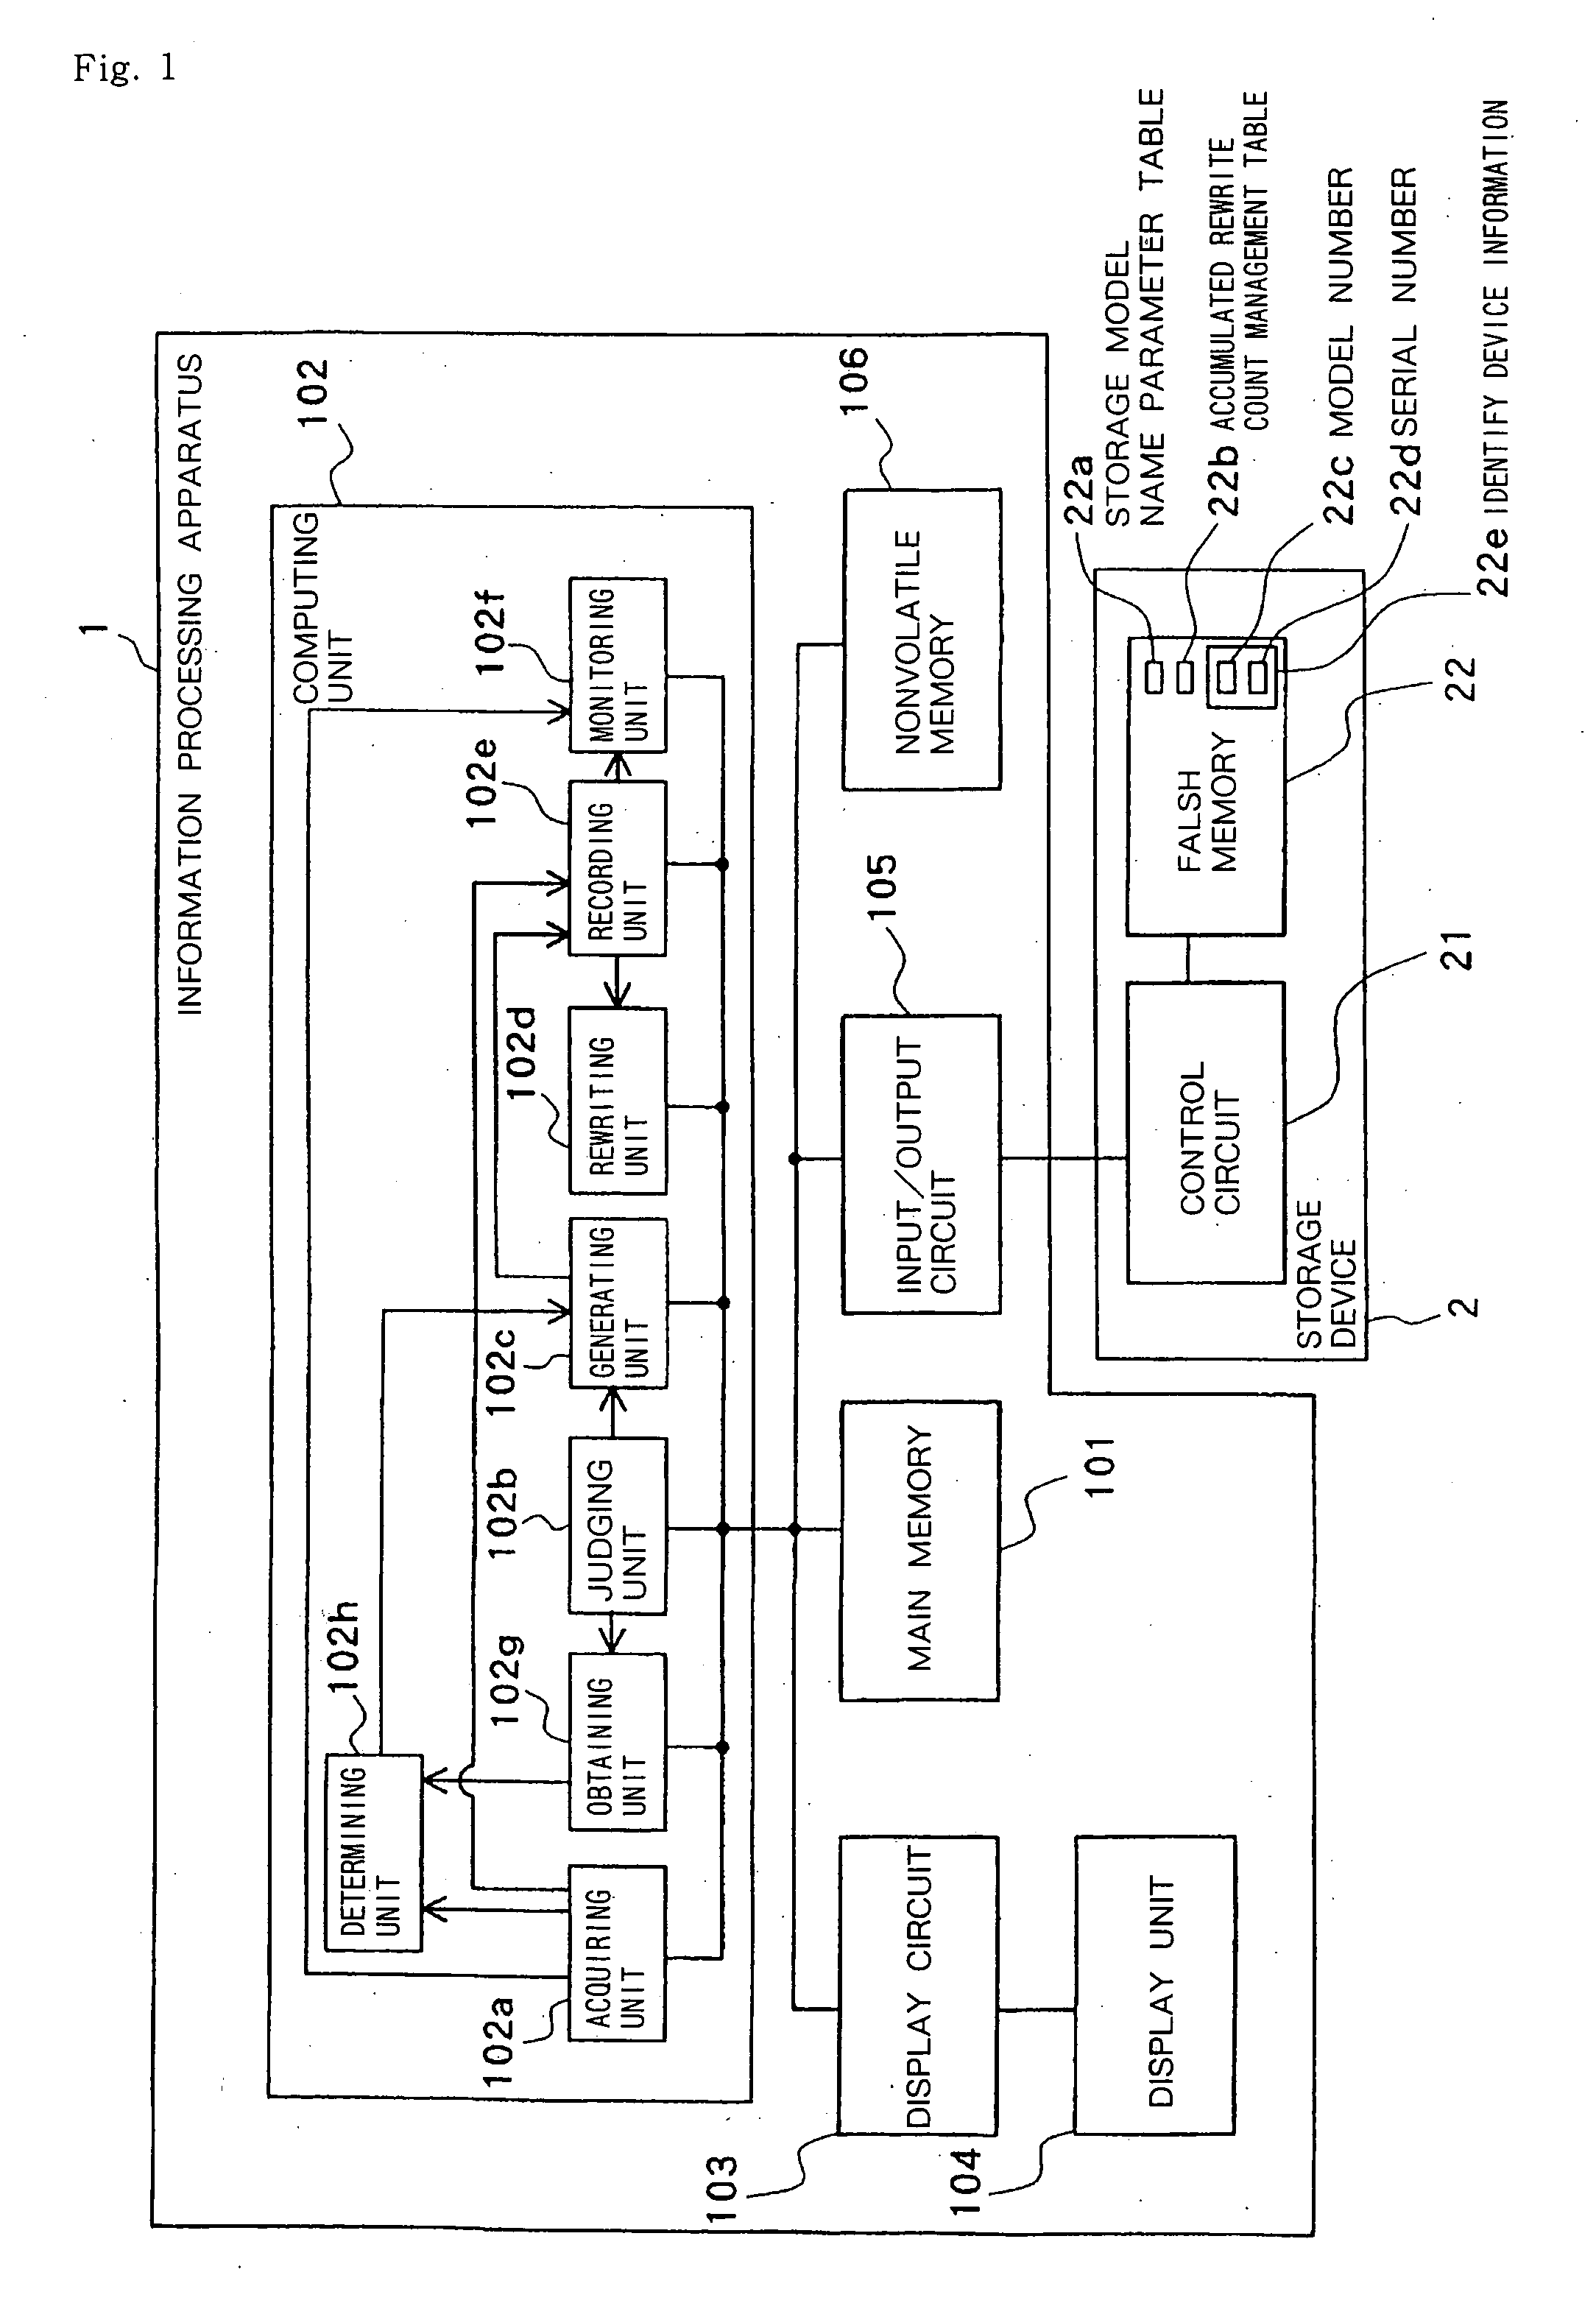 Information processing apparatus, lifetime monitoring method and program for monitoring lifetime of storage device including flash memory